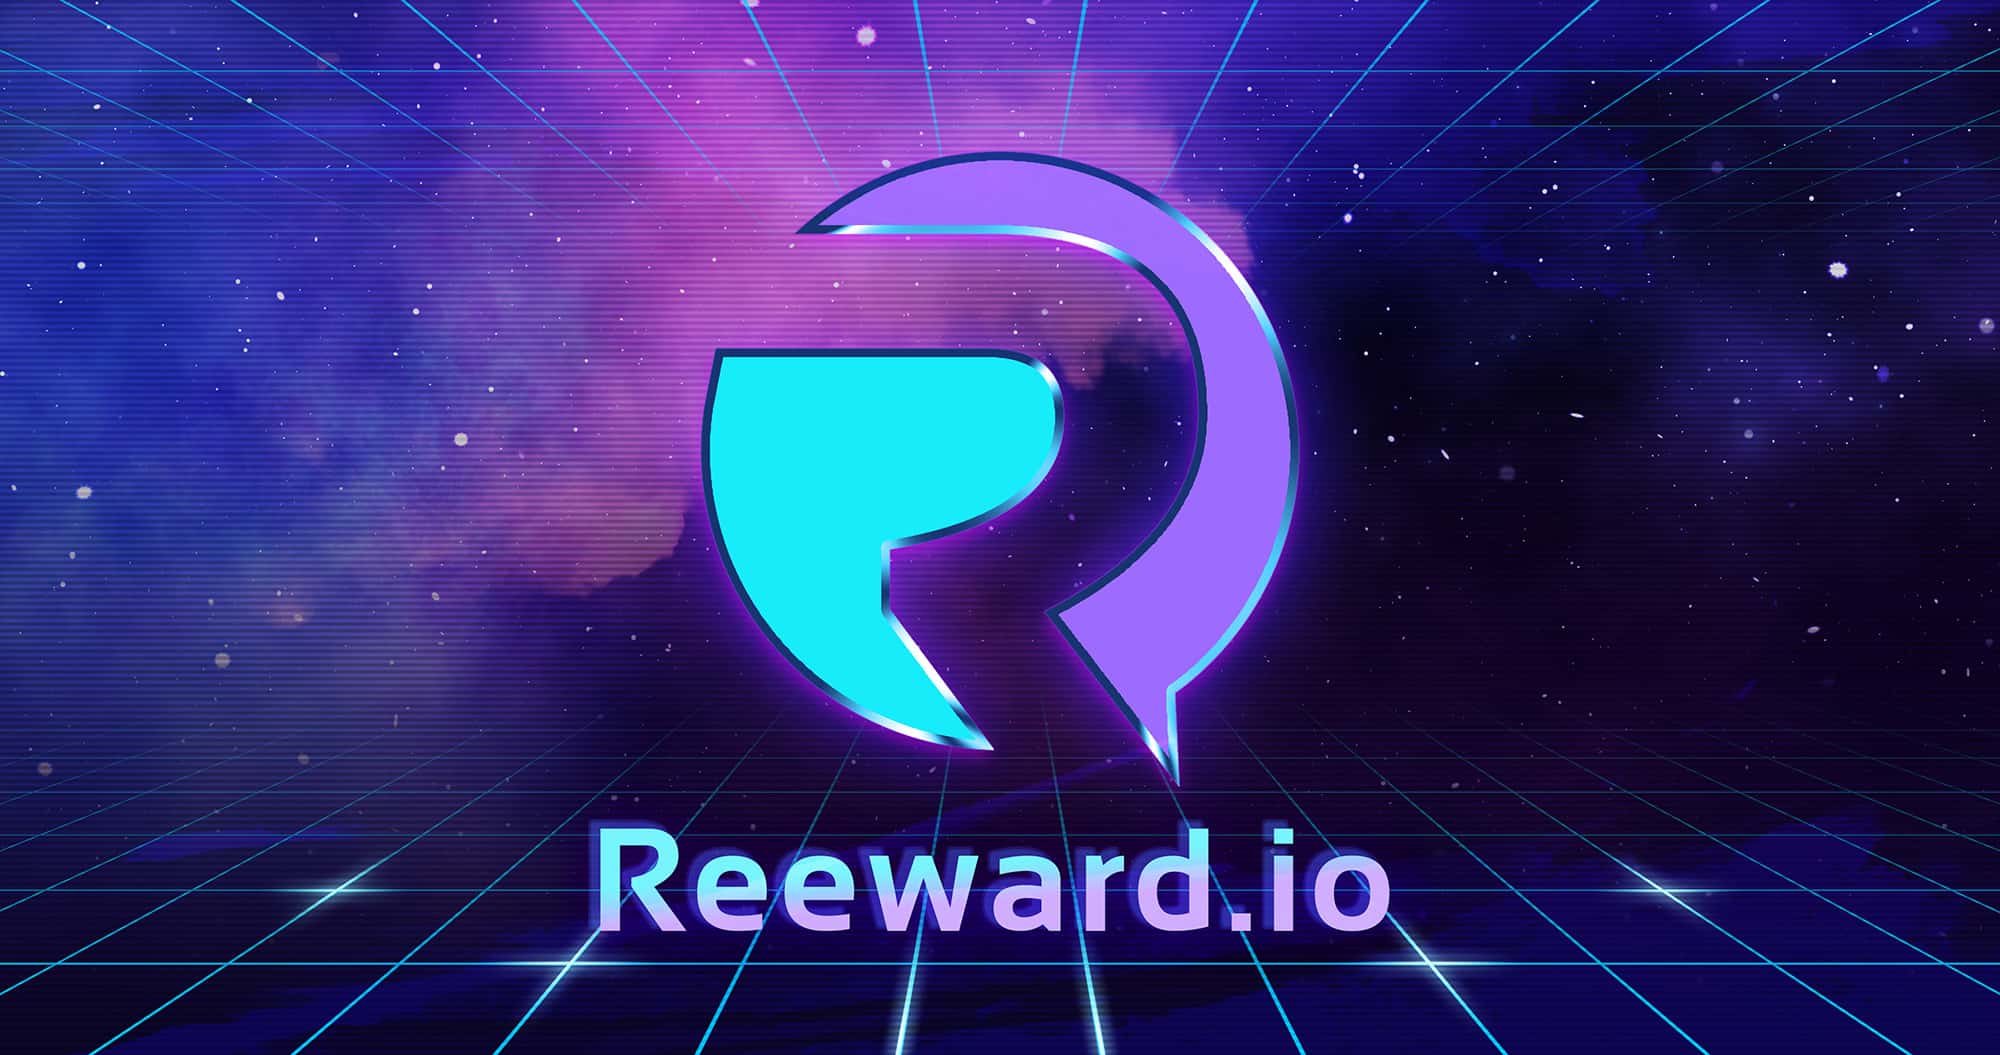 reewardio blockchain based rewards In the Galaverse event that took place this week, Gala games announced the launch of a 0 Million fund together with C2 Ventures in order to invest in game developers and Web3 games and other projects.